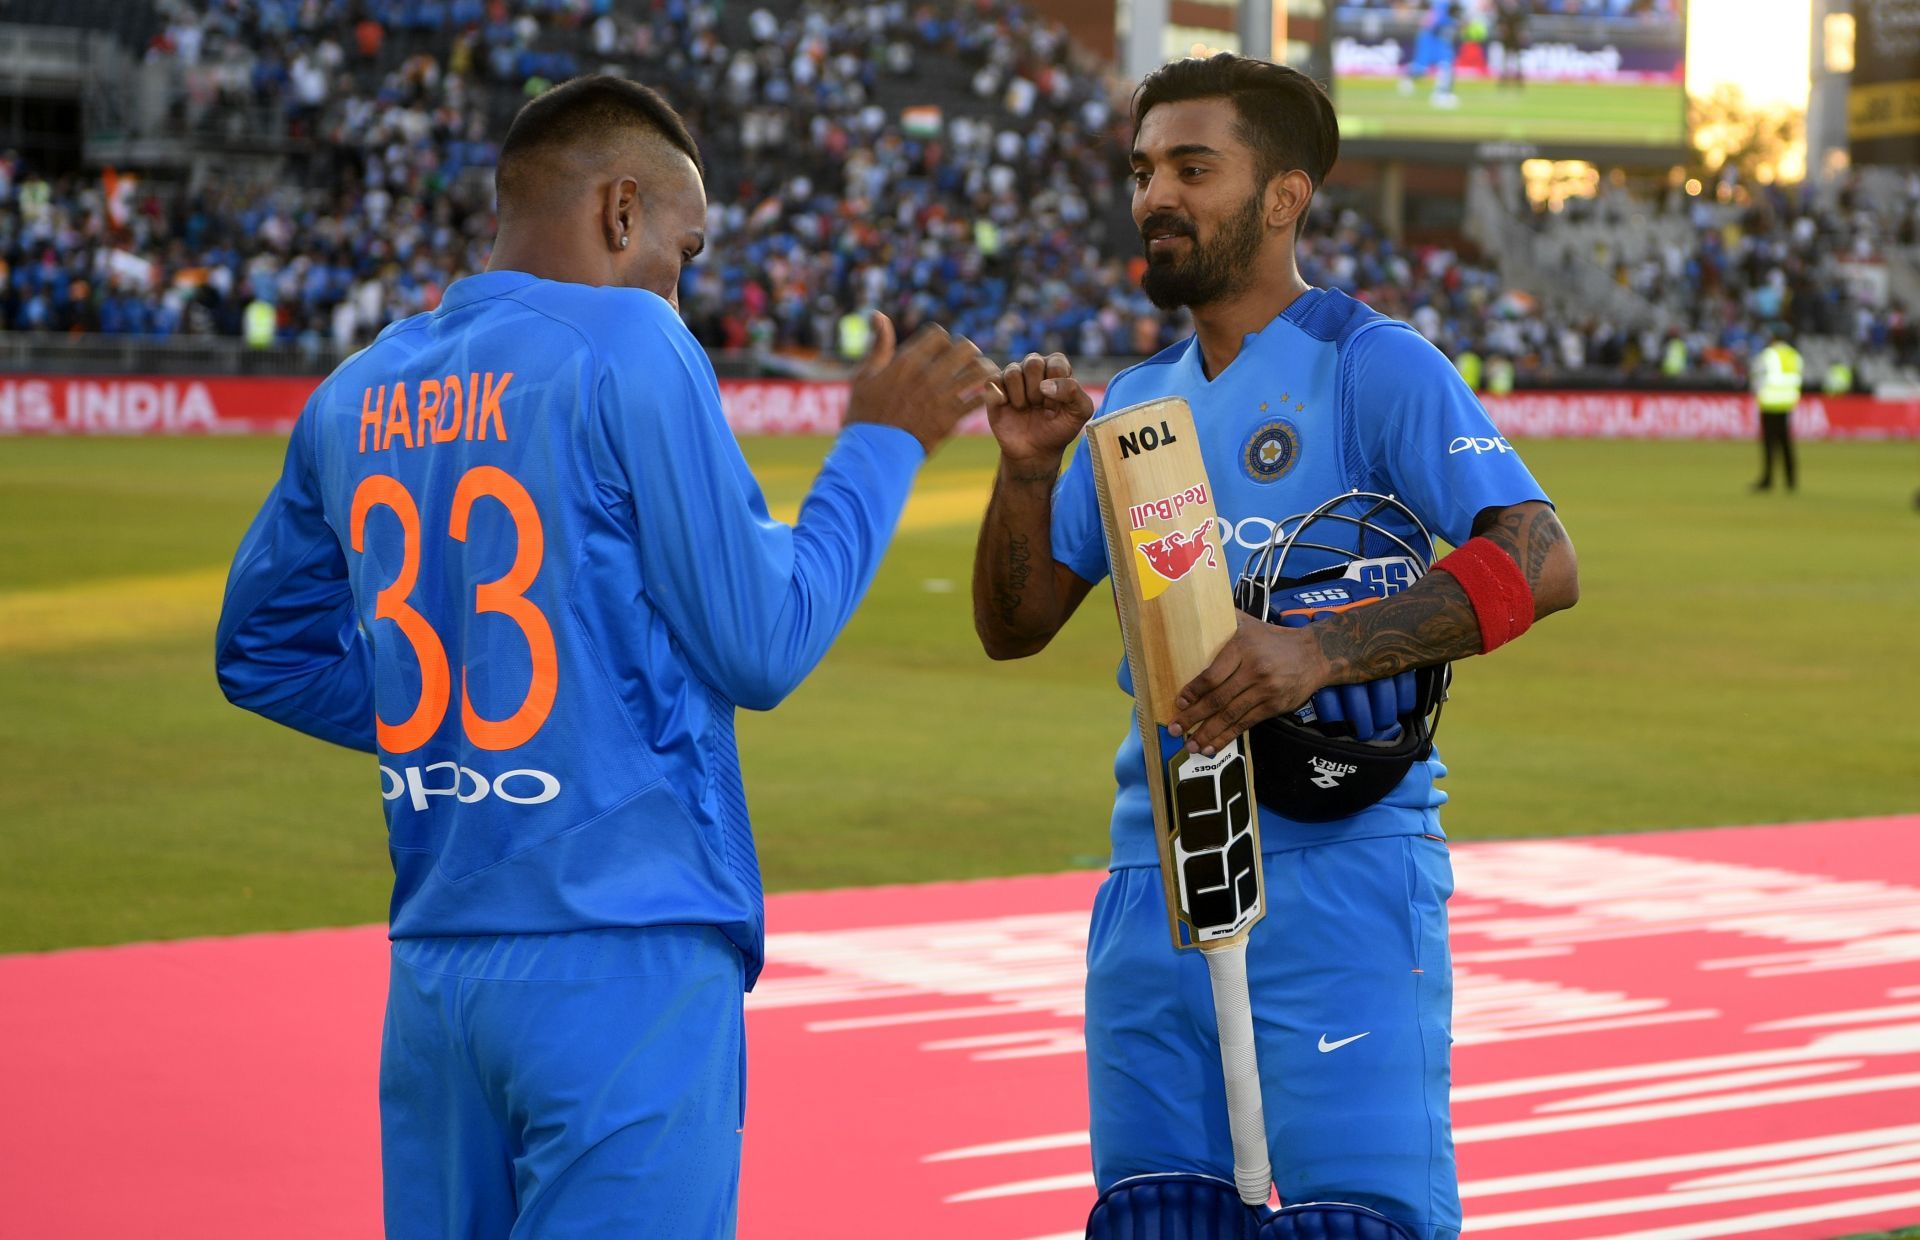 KL Rahul and Hardik Pandya could join the two new teams ahead of IPL Auction 2022